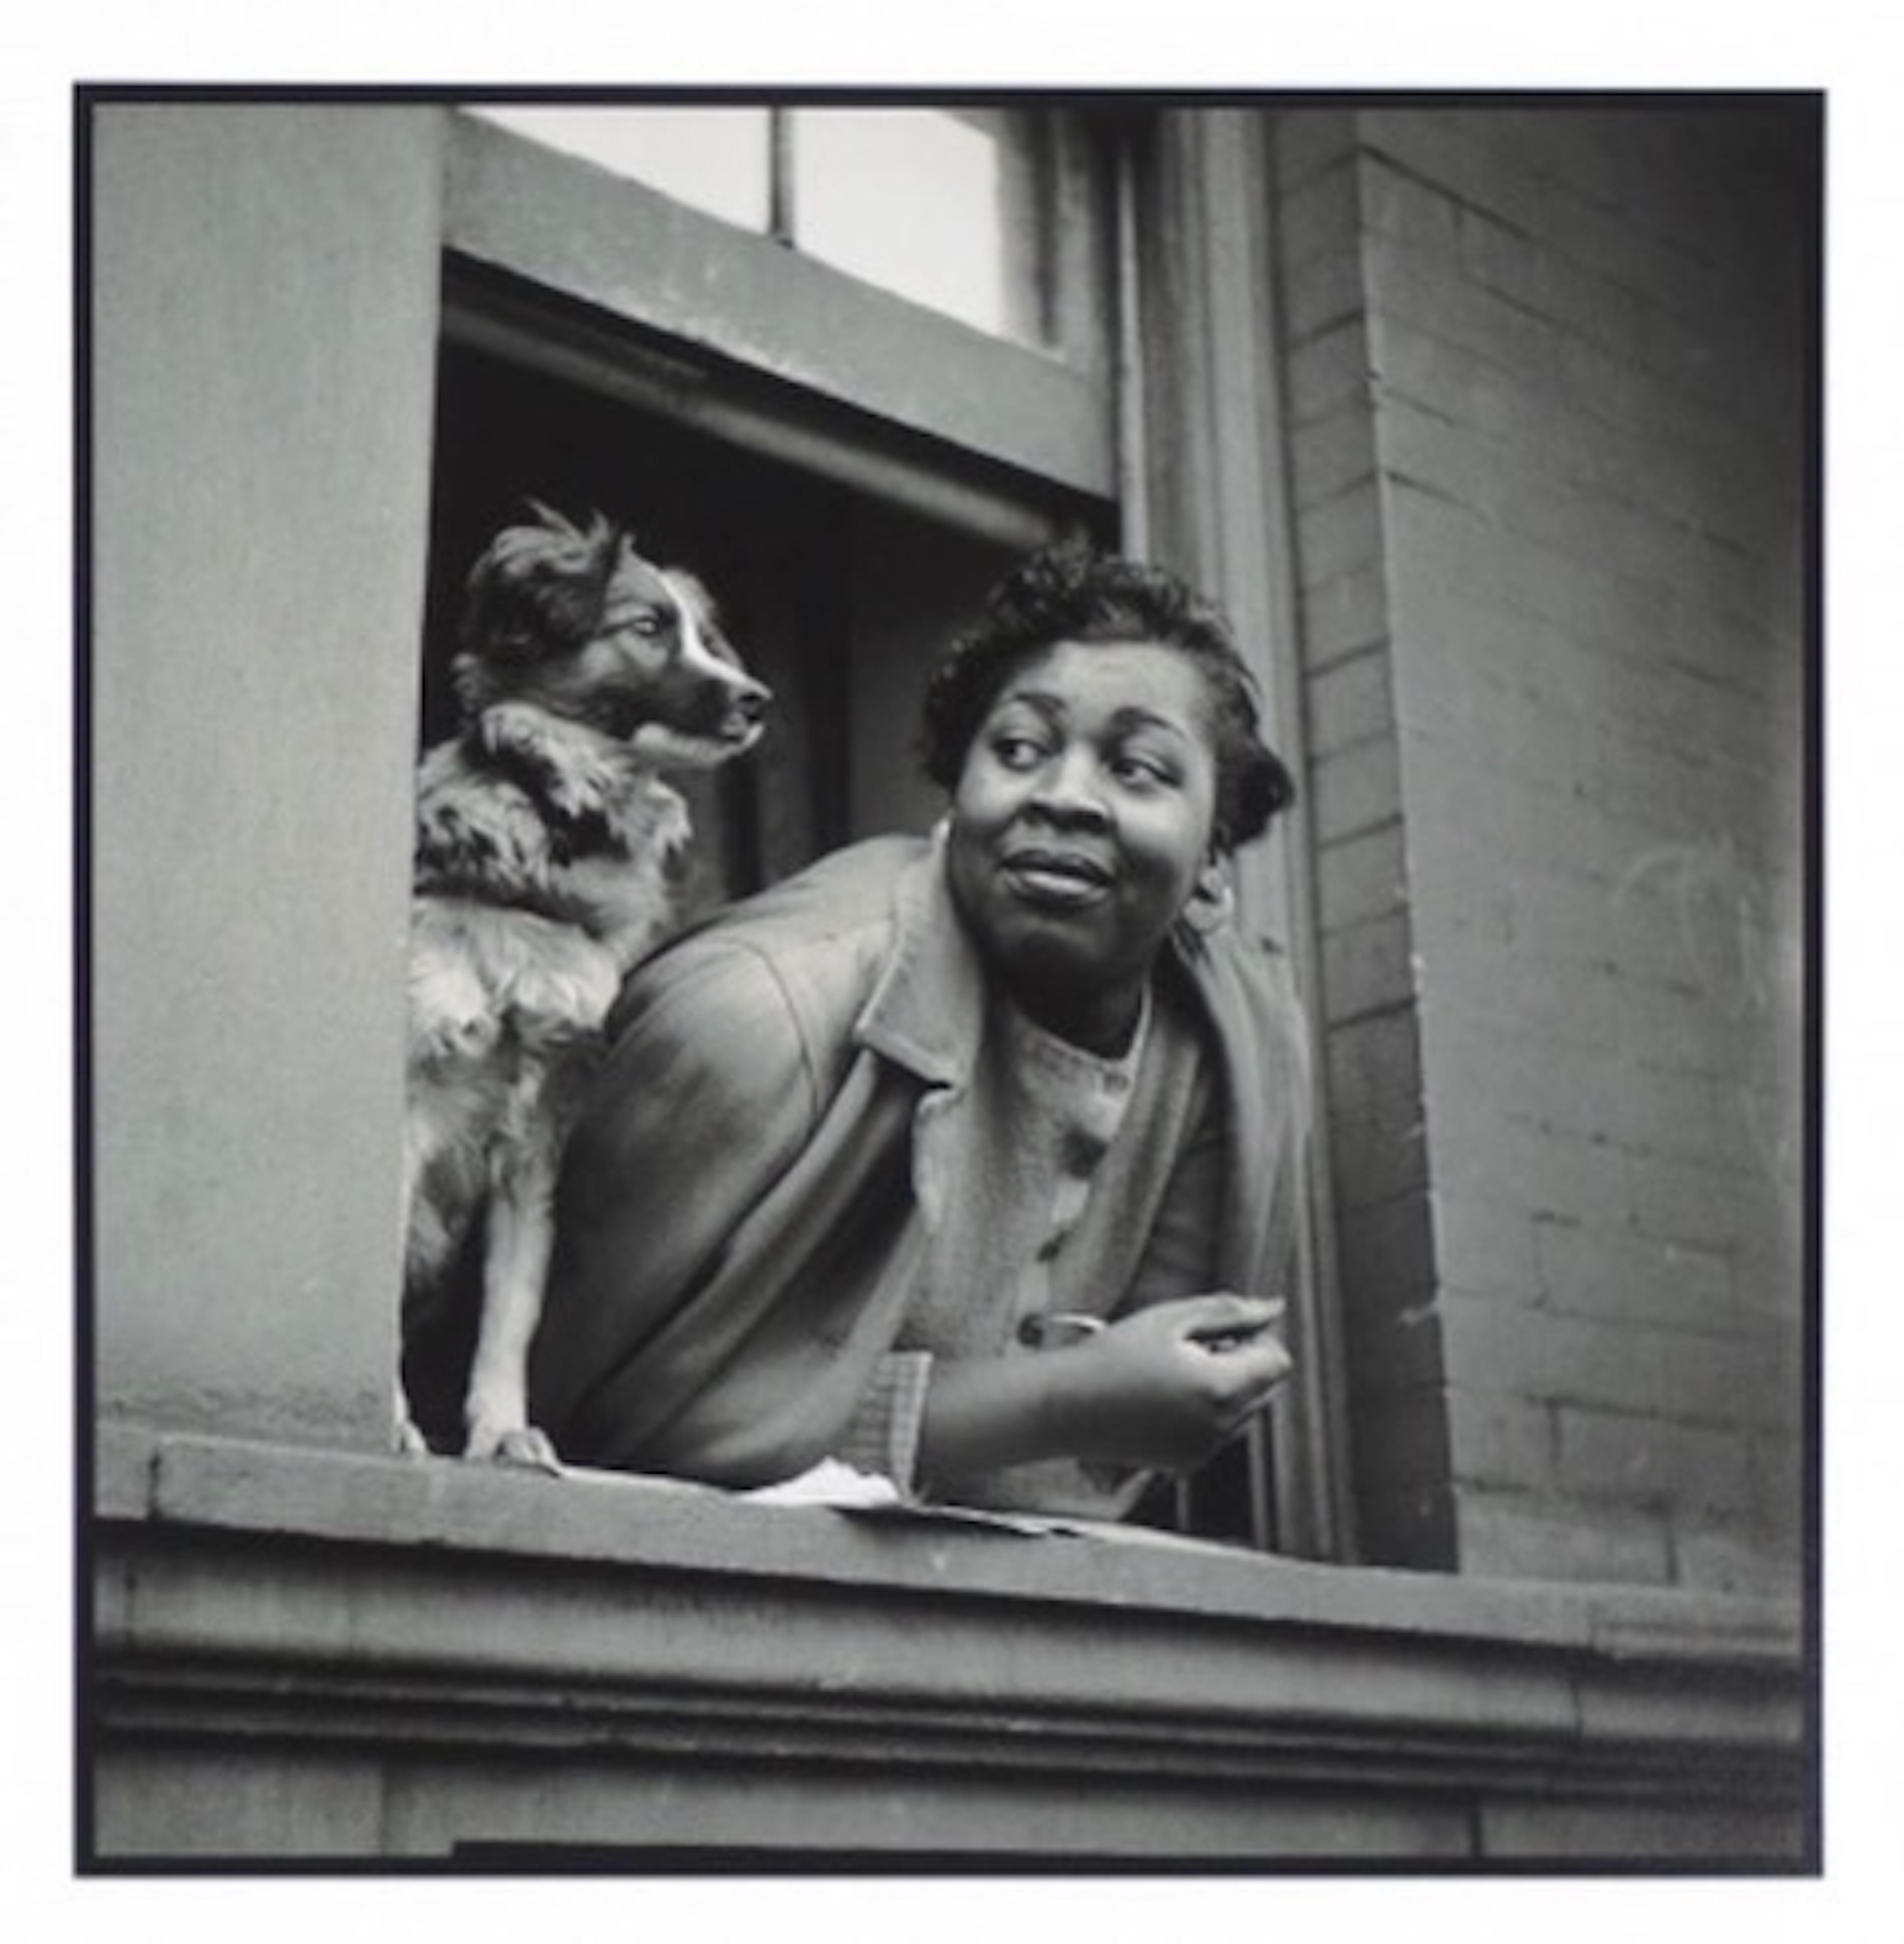 Gordon Parks Black and White Photograph - Woman and Dog in Window, Harlem from the Rede Leonardo Portfolio